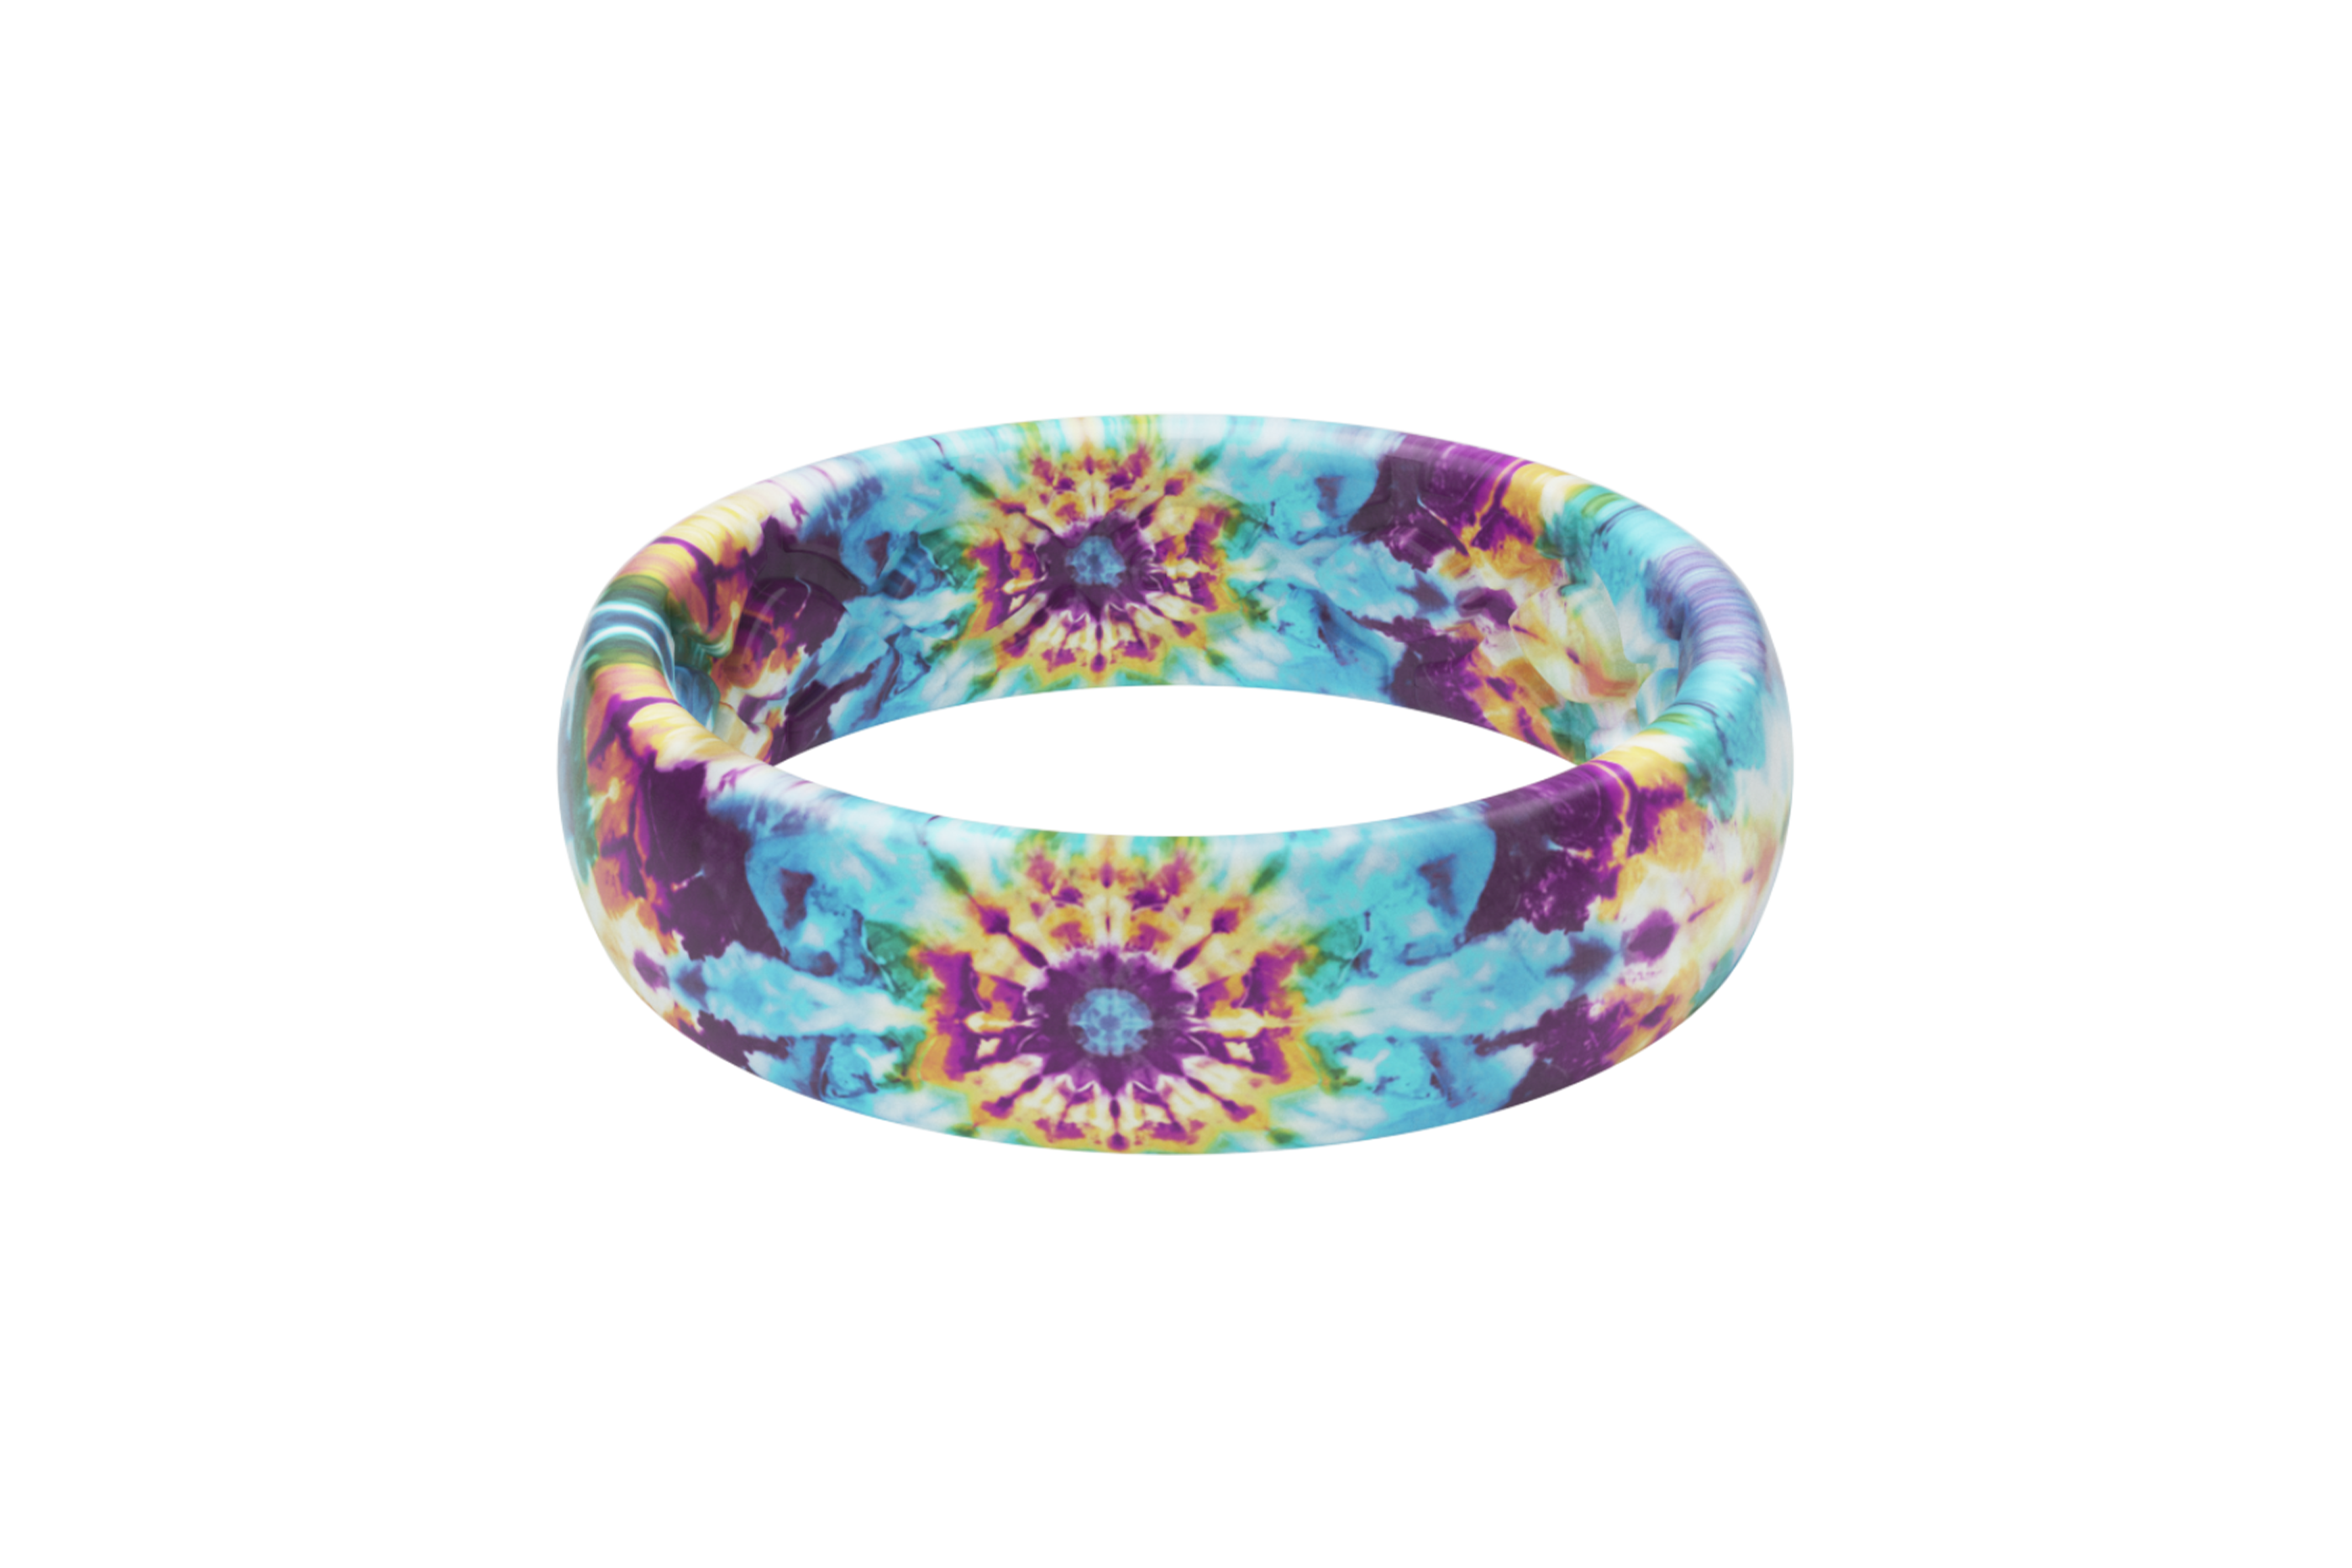 Groove Life Wild Thing Thin Tie-Dye viewed front on